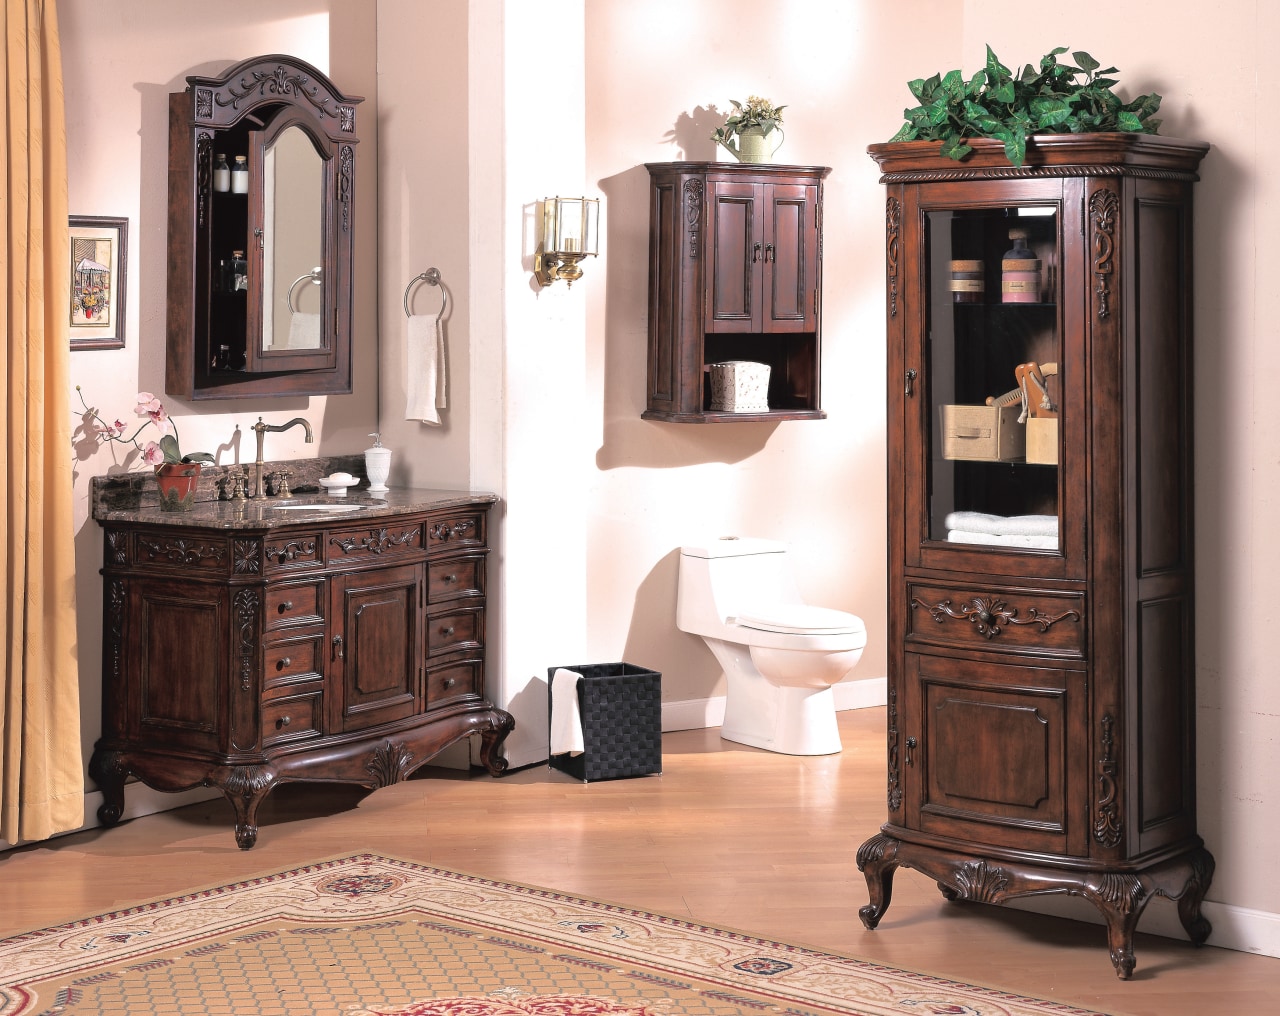 View of a traditional-styled bathroom which features bathroom bathroom accessory, bathroom cabinet, cabinetry, chest of drawers, china cabinet, display case, drawer, furniture, hardwood, shelving, white